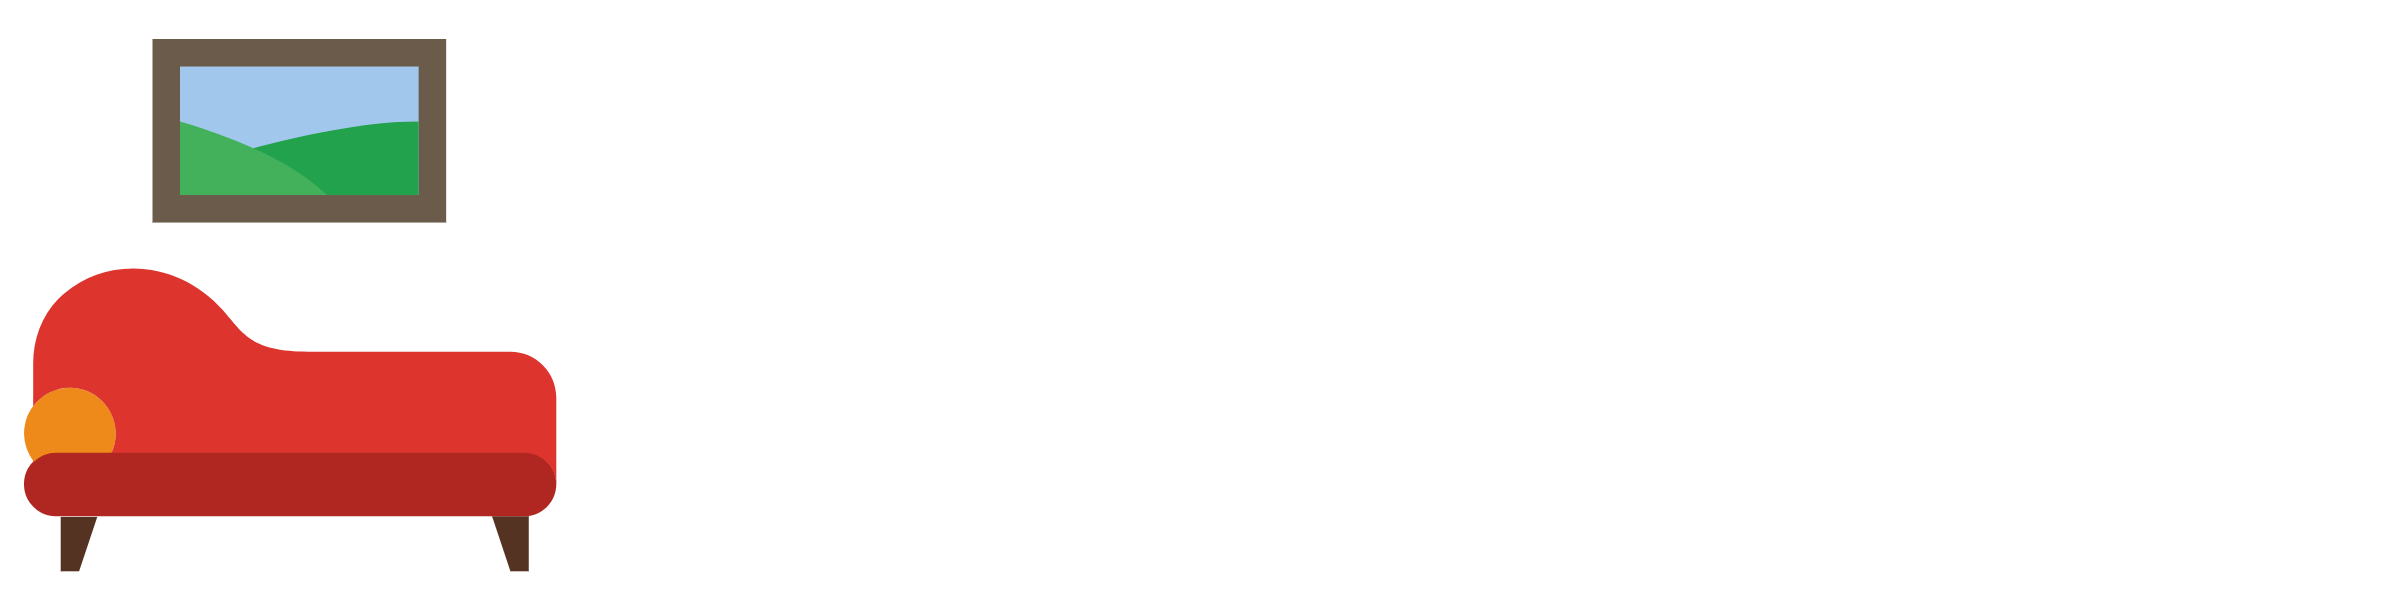 Brothers' Furniture